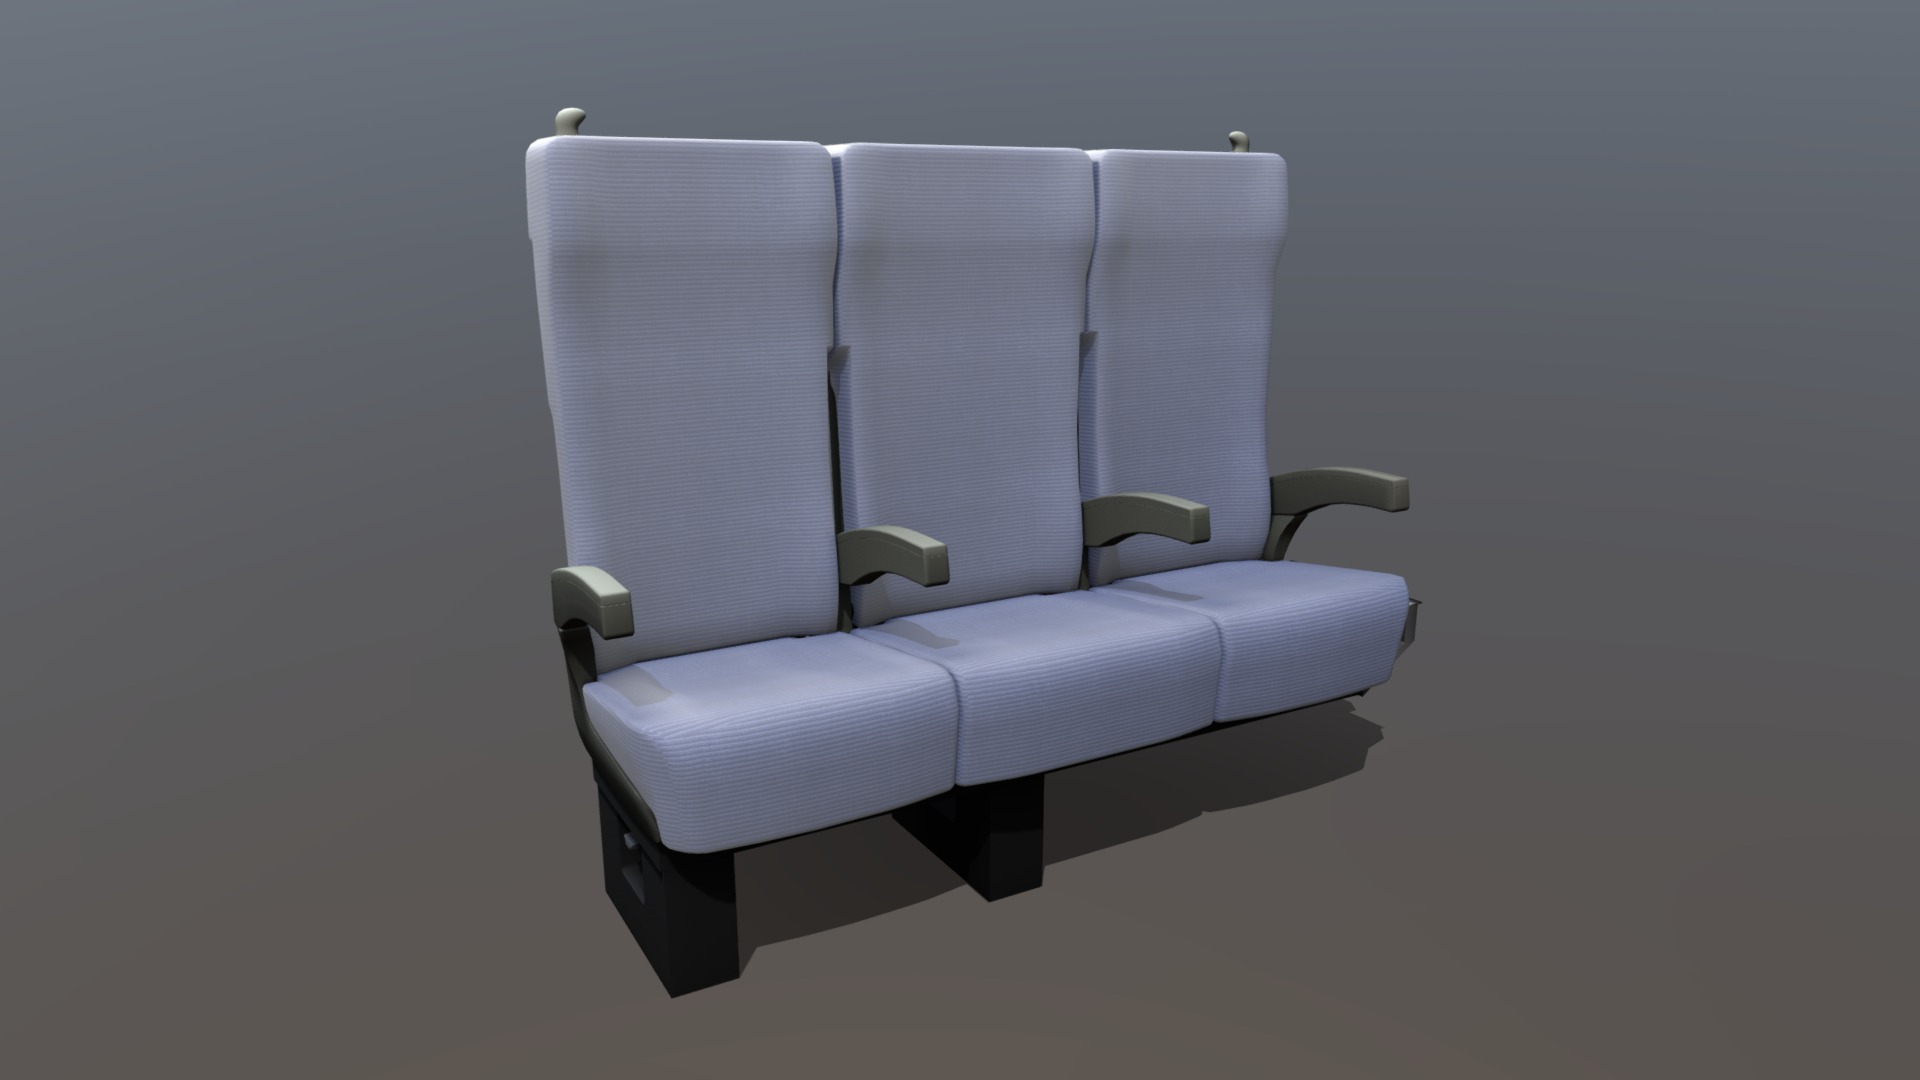 3D model Train seat 020 - This is a 3D model of the Train seat 020. The 3D model is about a couple of white chairs.